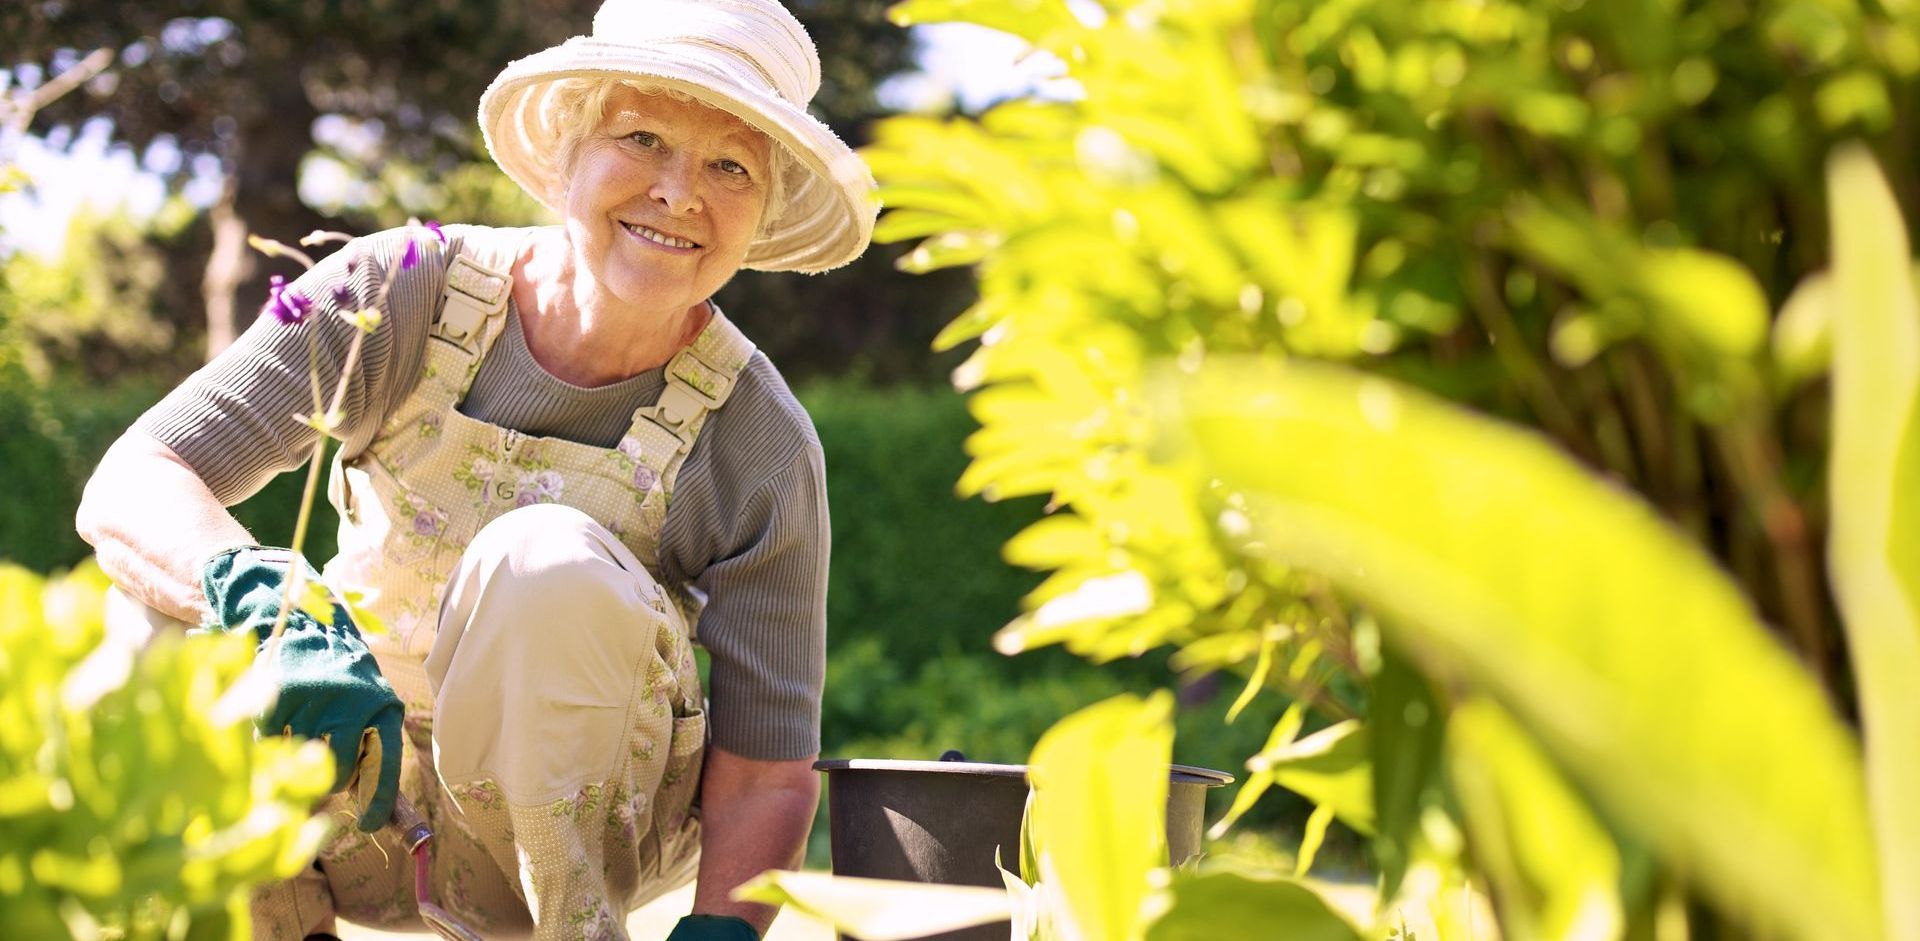 Elderly woman is kneeling down in a garden. Stem Cells Philadelphia offers less invasive treatments such as injections of platelet-rich plasma (PRP) and stem cell therapy to treat arthritis.